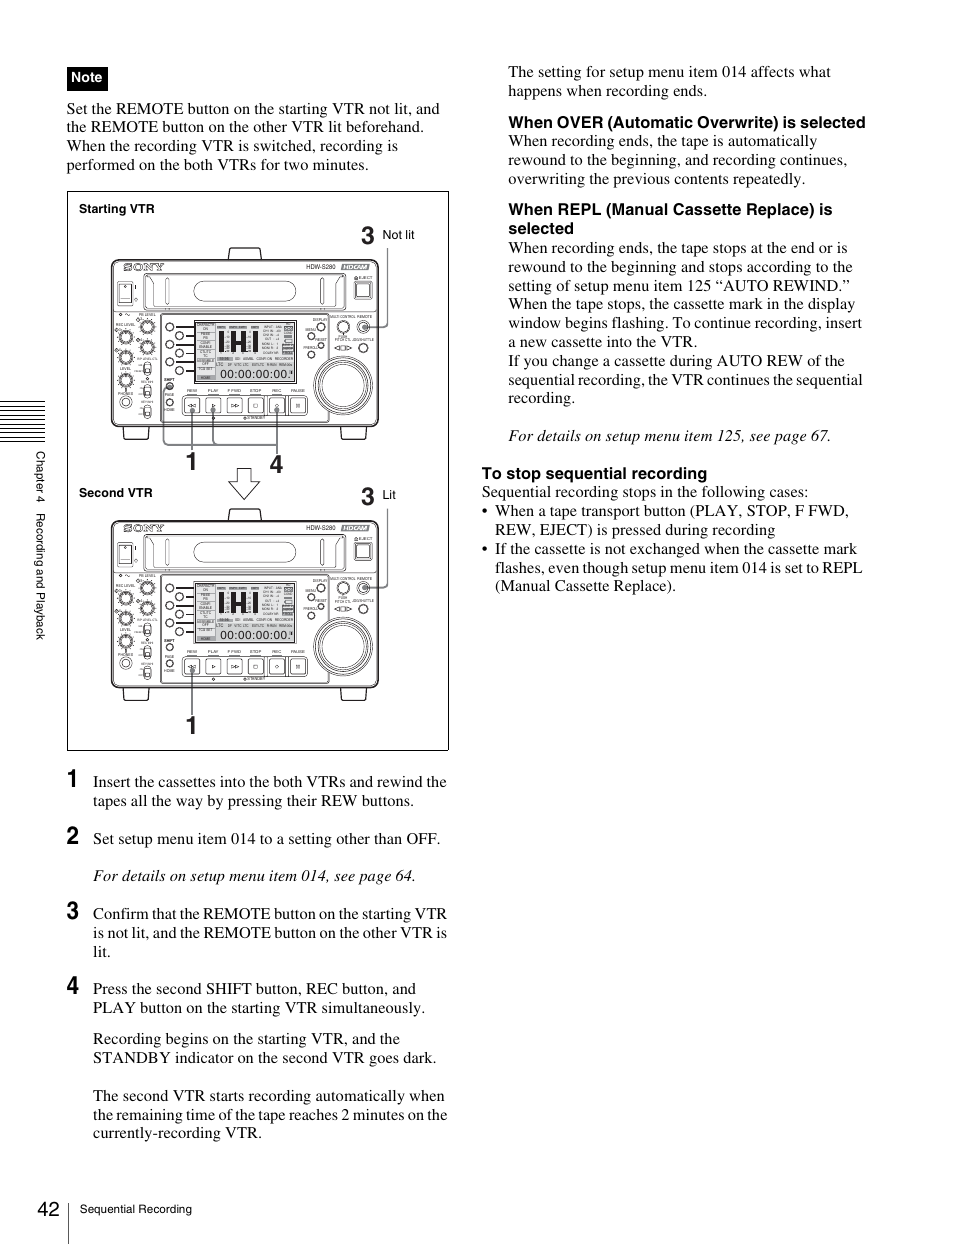 Starting vtr second vtr not lit lit | Sony HDW-S280 User Manual | Page 42 / 94